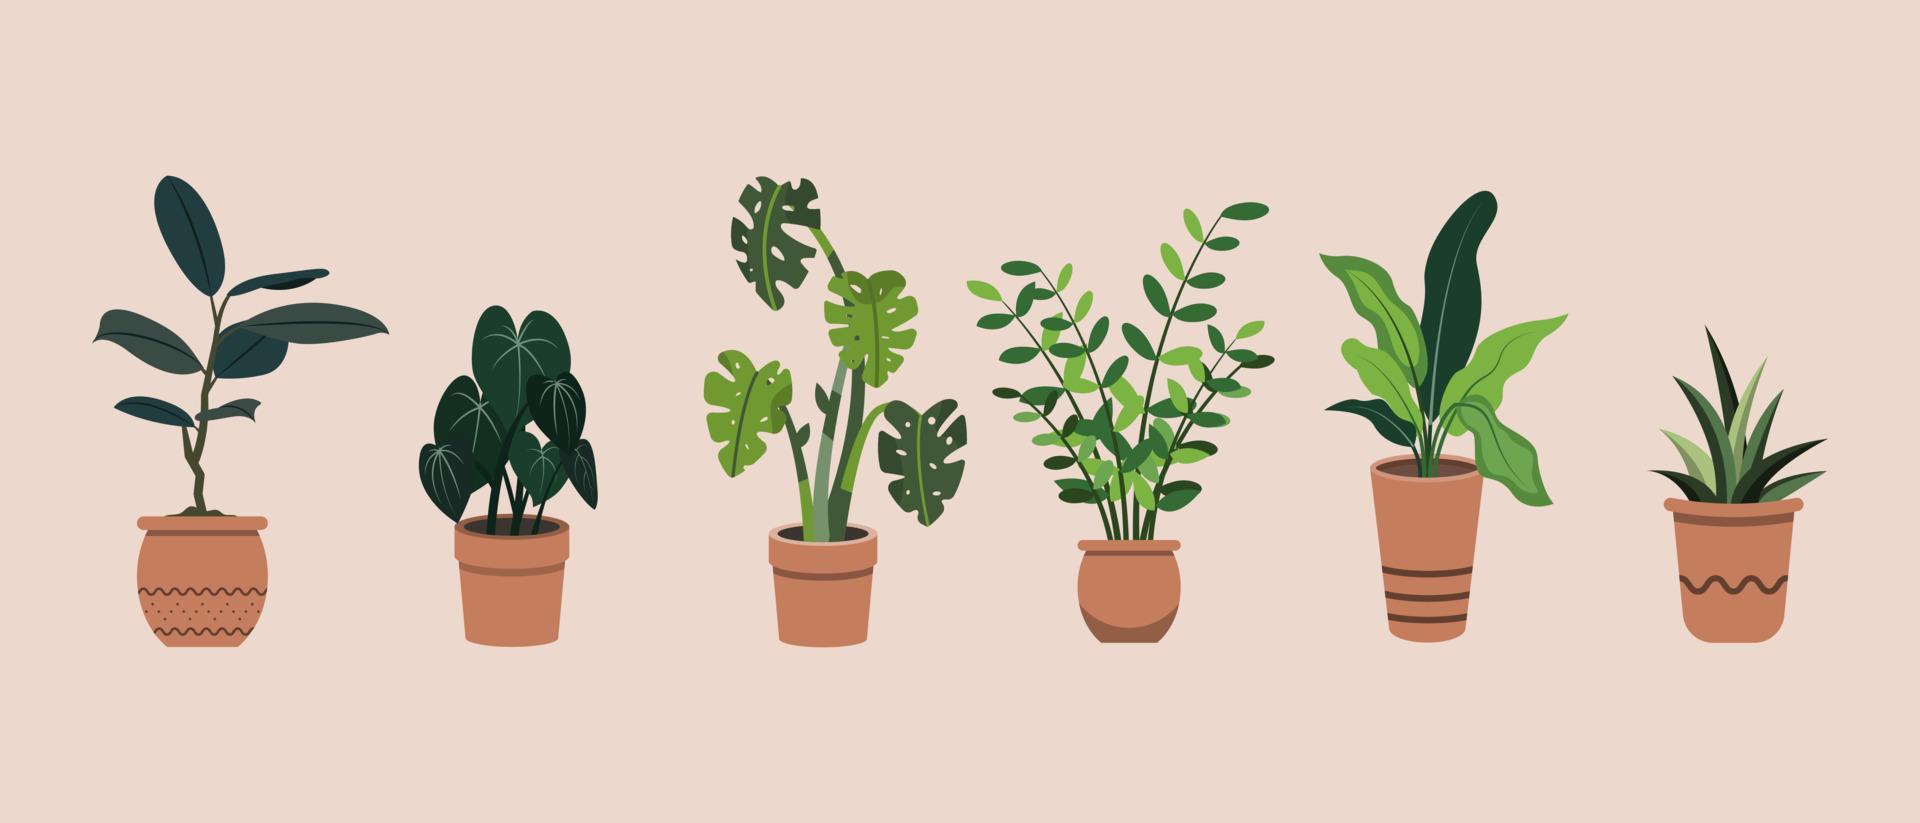 Group of Hand Drawn Flat Potted Houseplants illustration vector